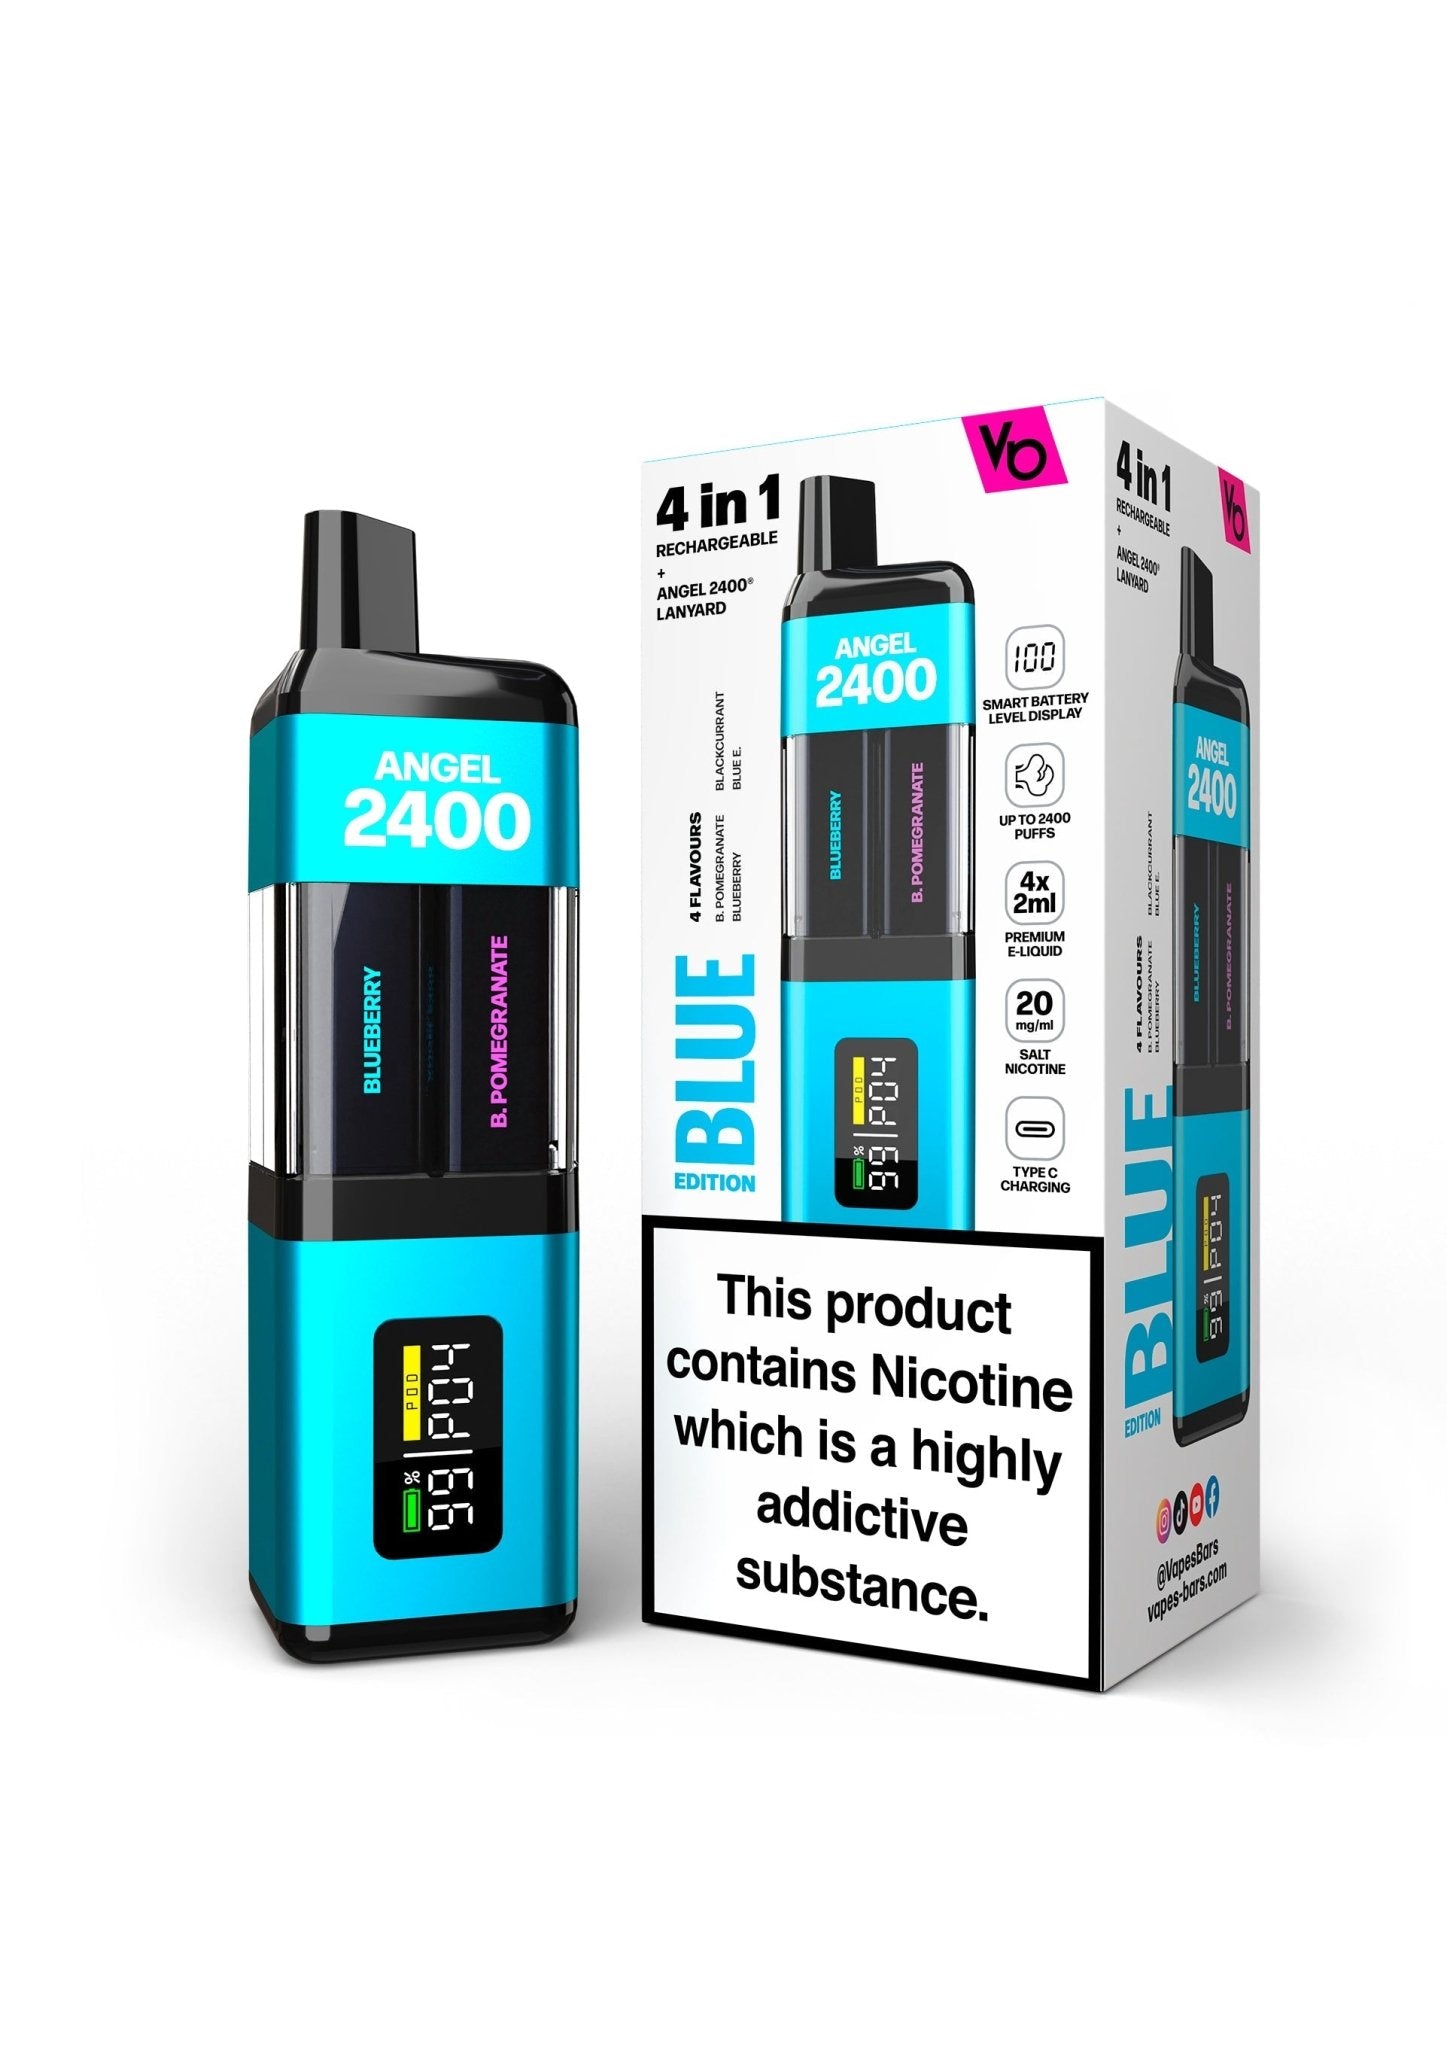 Angel 2400 Puffs Disposble Vape by Vapes Bars - Wolfvapes.co.uk-Blue Edition (Multi Flavour)